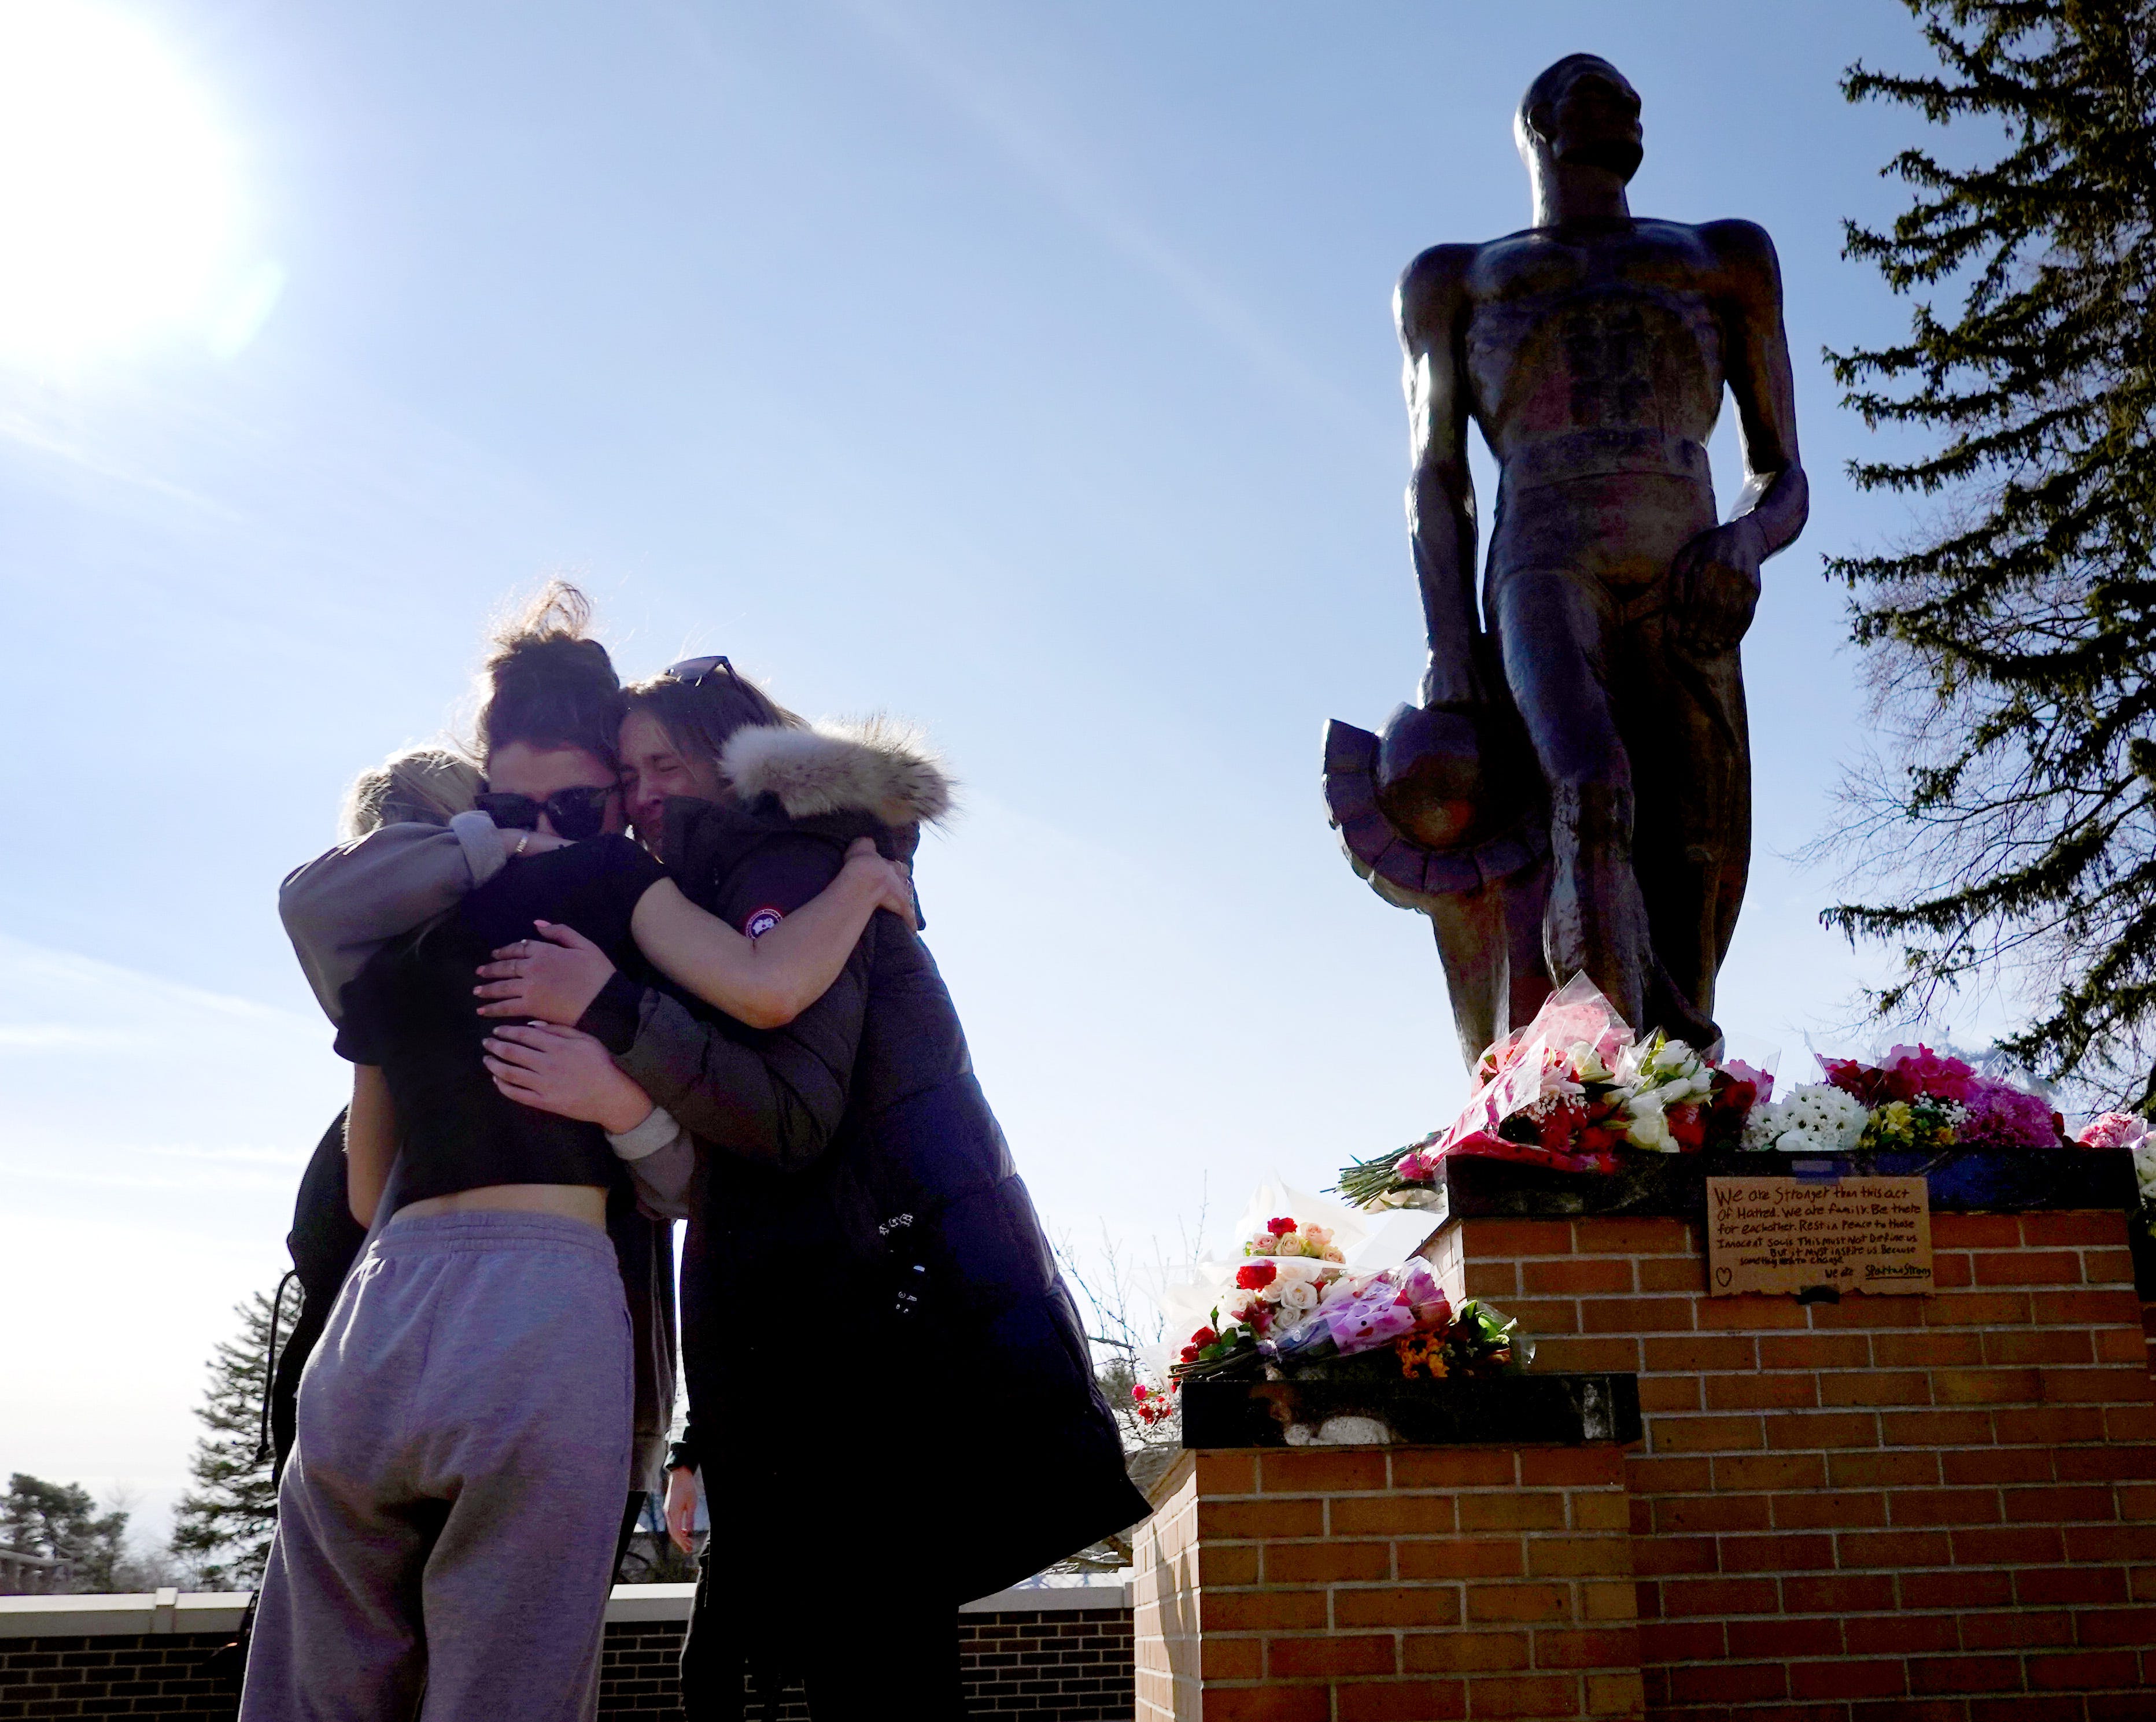 Students mourn and pray at the Spartan statue on the campus Michigan State University on February 14, 2023 in East Lansing, Michigan. A gunman opened fire at two locations on the campus last night killing three students and injuring several others.